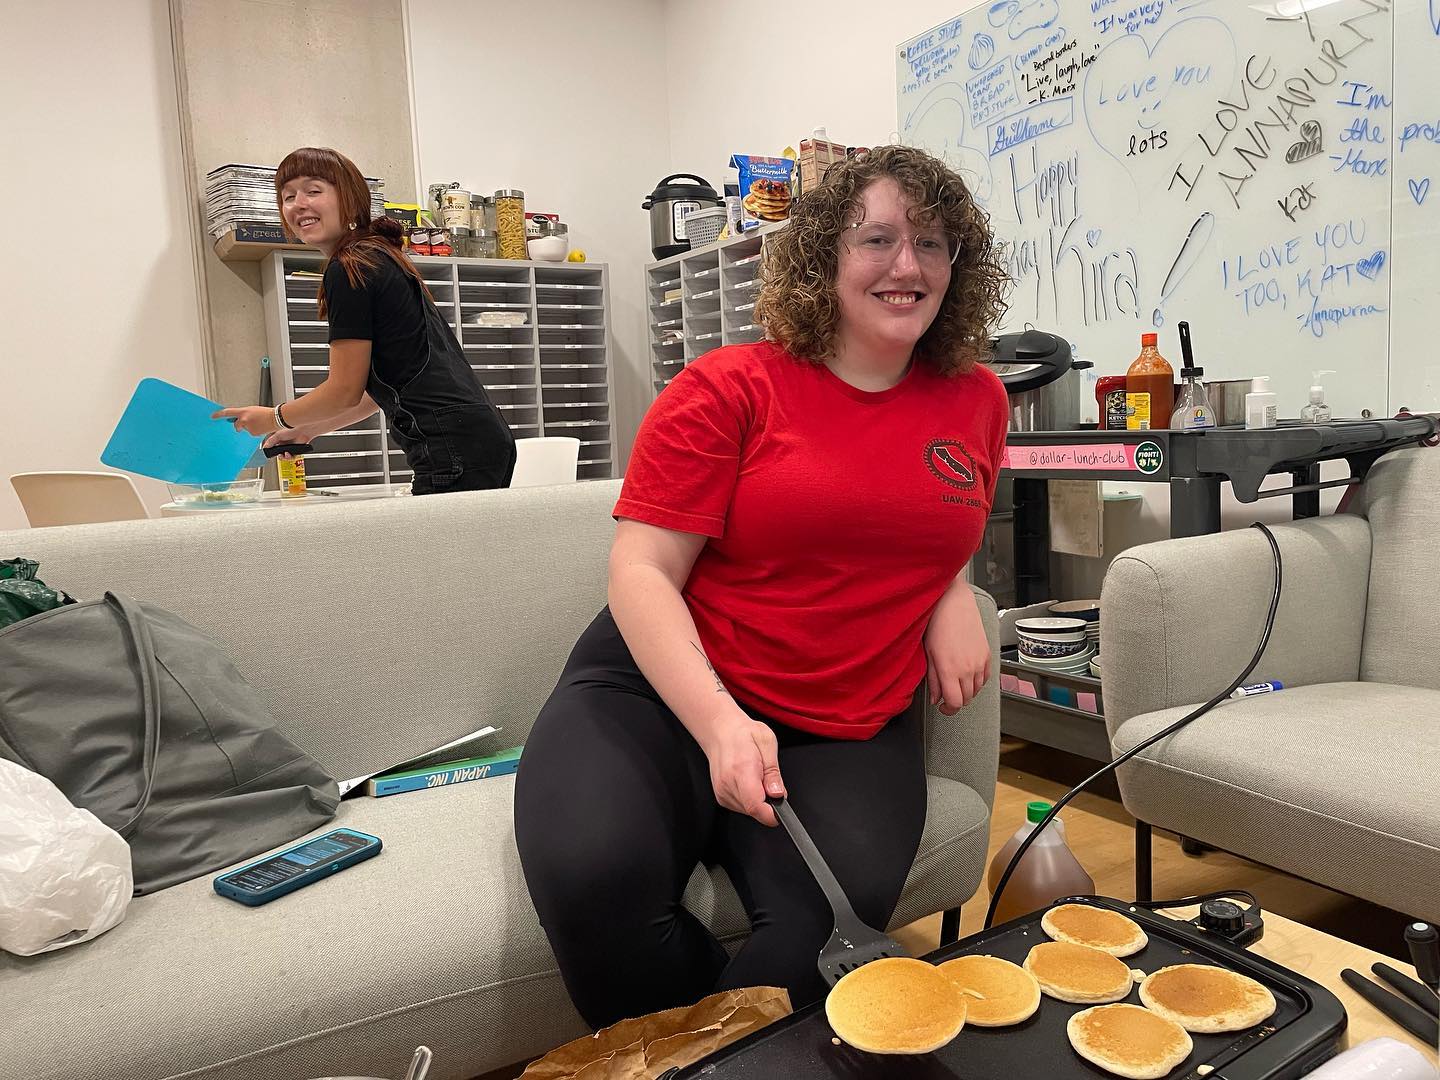 A person sitting on a couch smiles at the camera while they flip pancakes on an electric griddle. A person in the background smiles at the camera while holding a cutting mat.